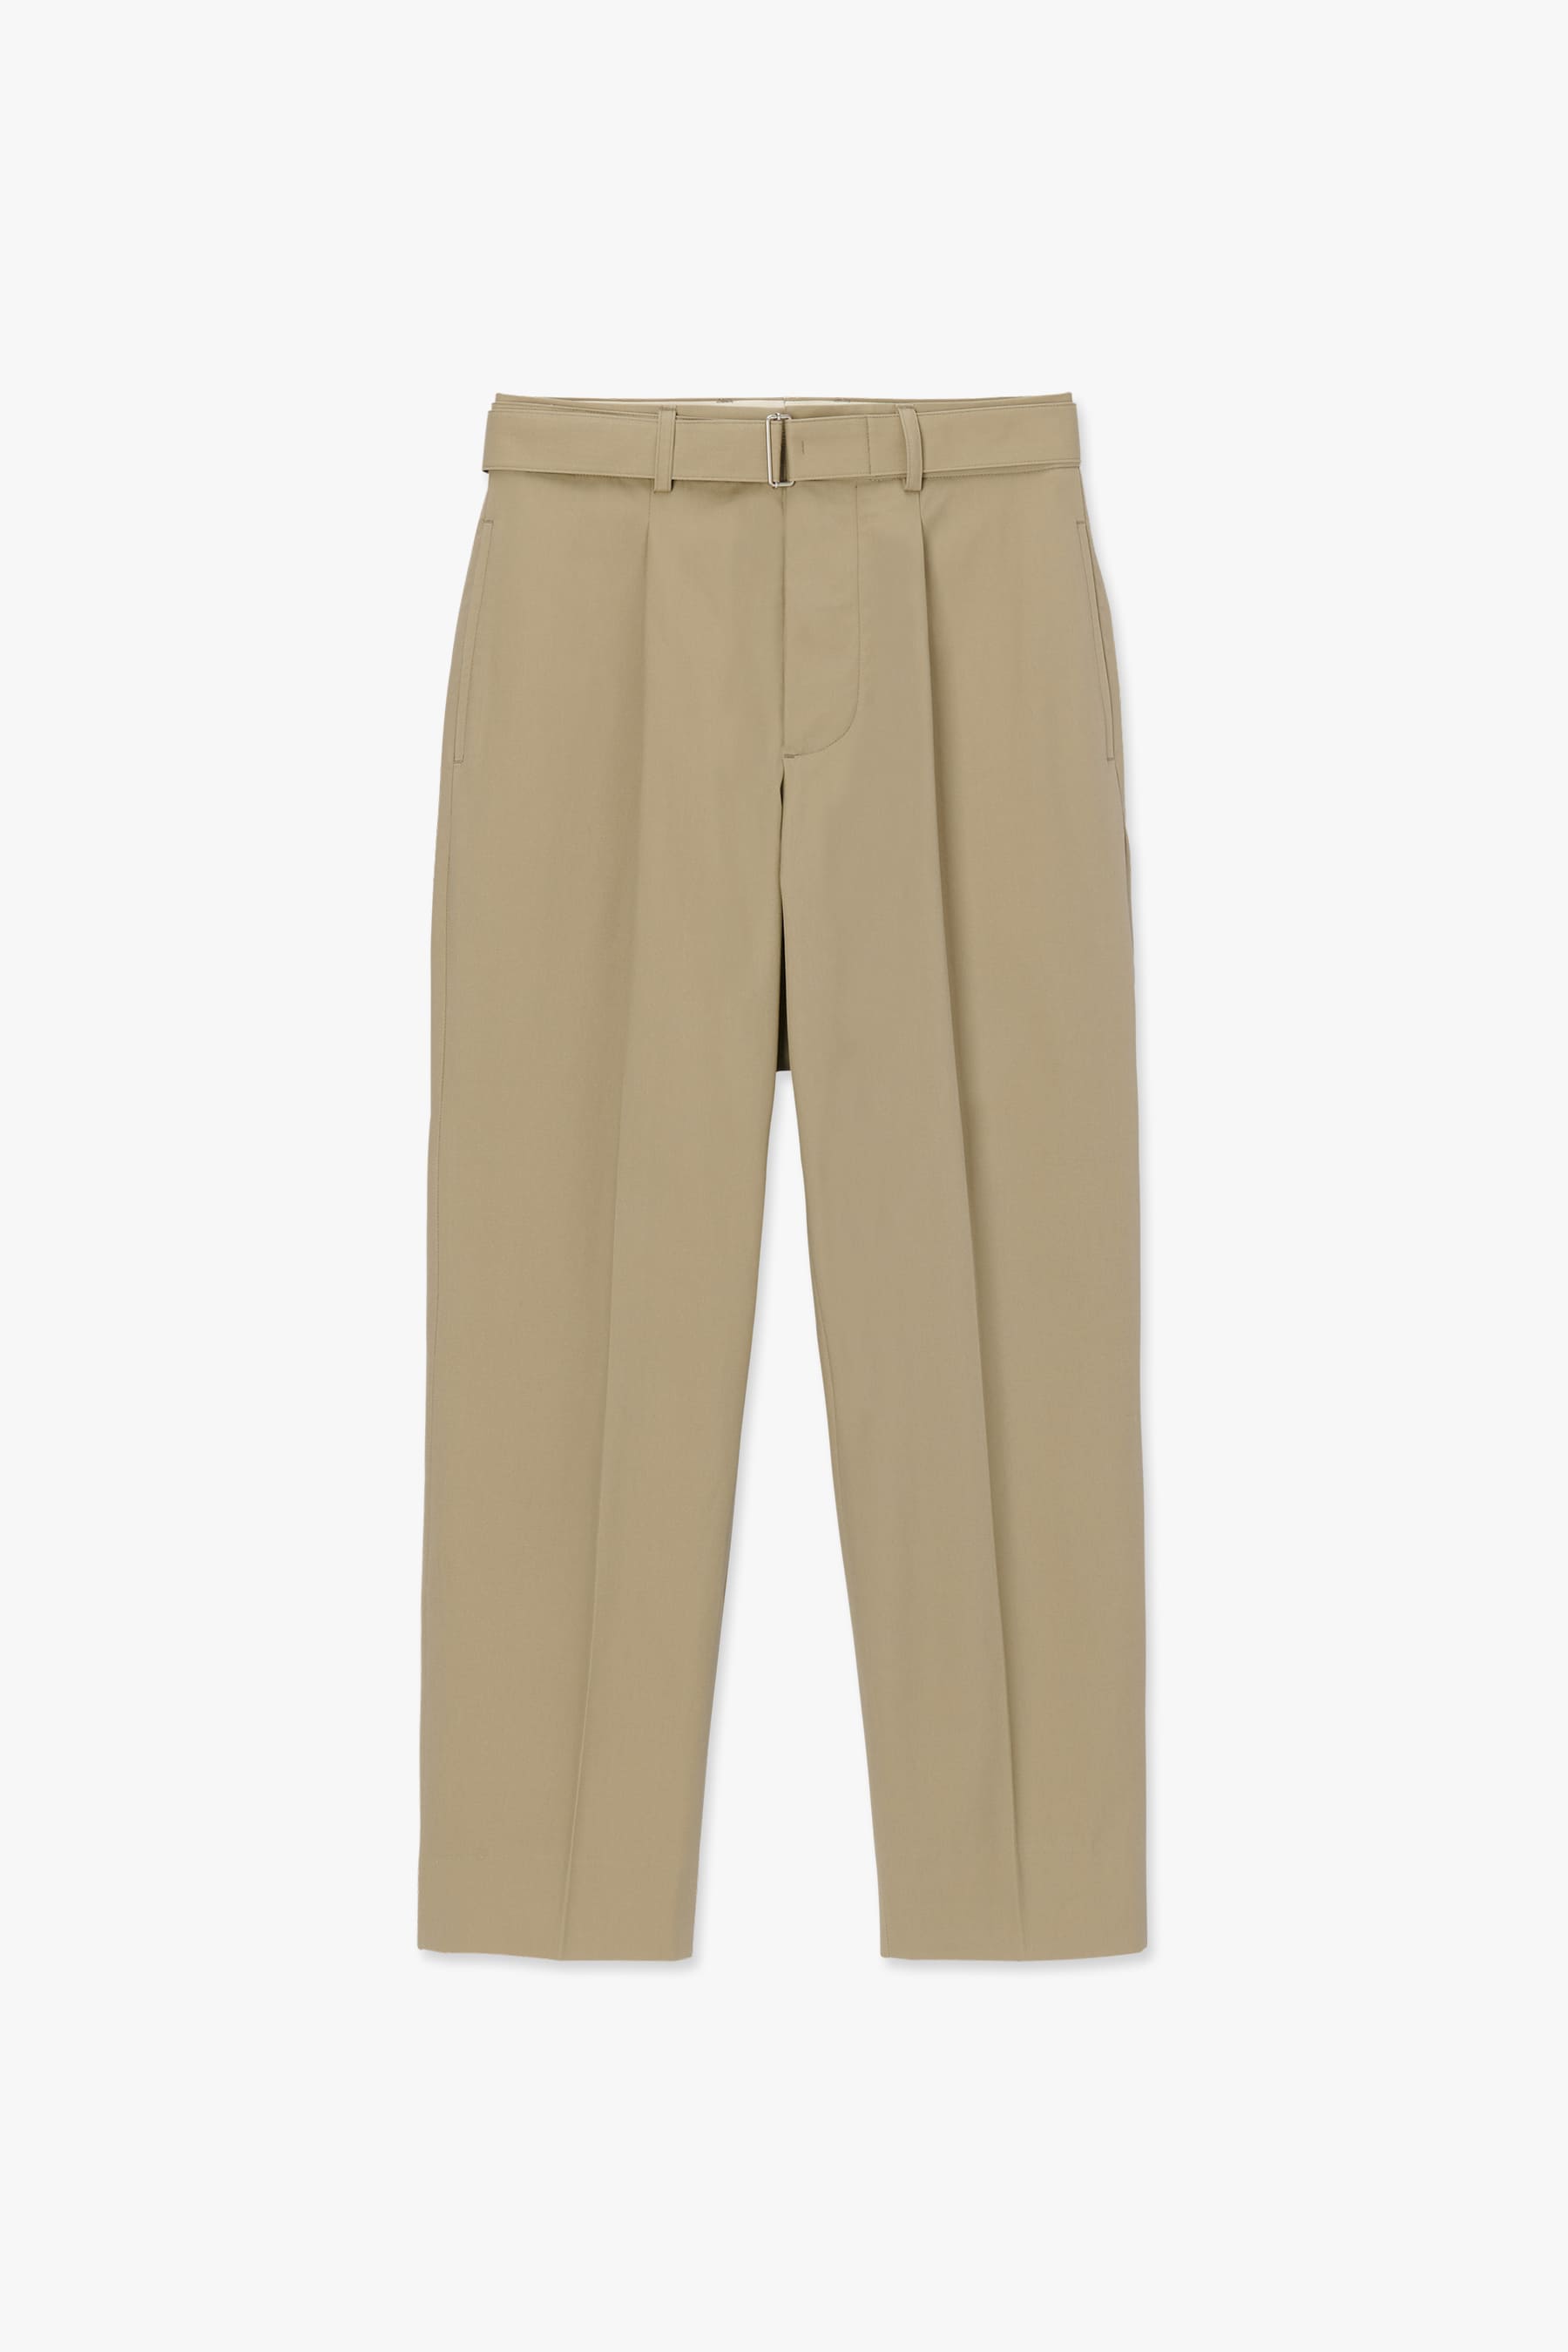 BEIGE ONE TUCK COTTON BELTED PANTS 03